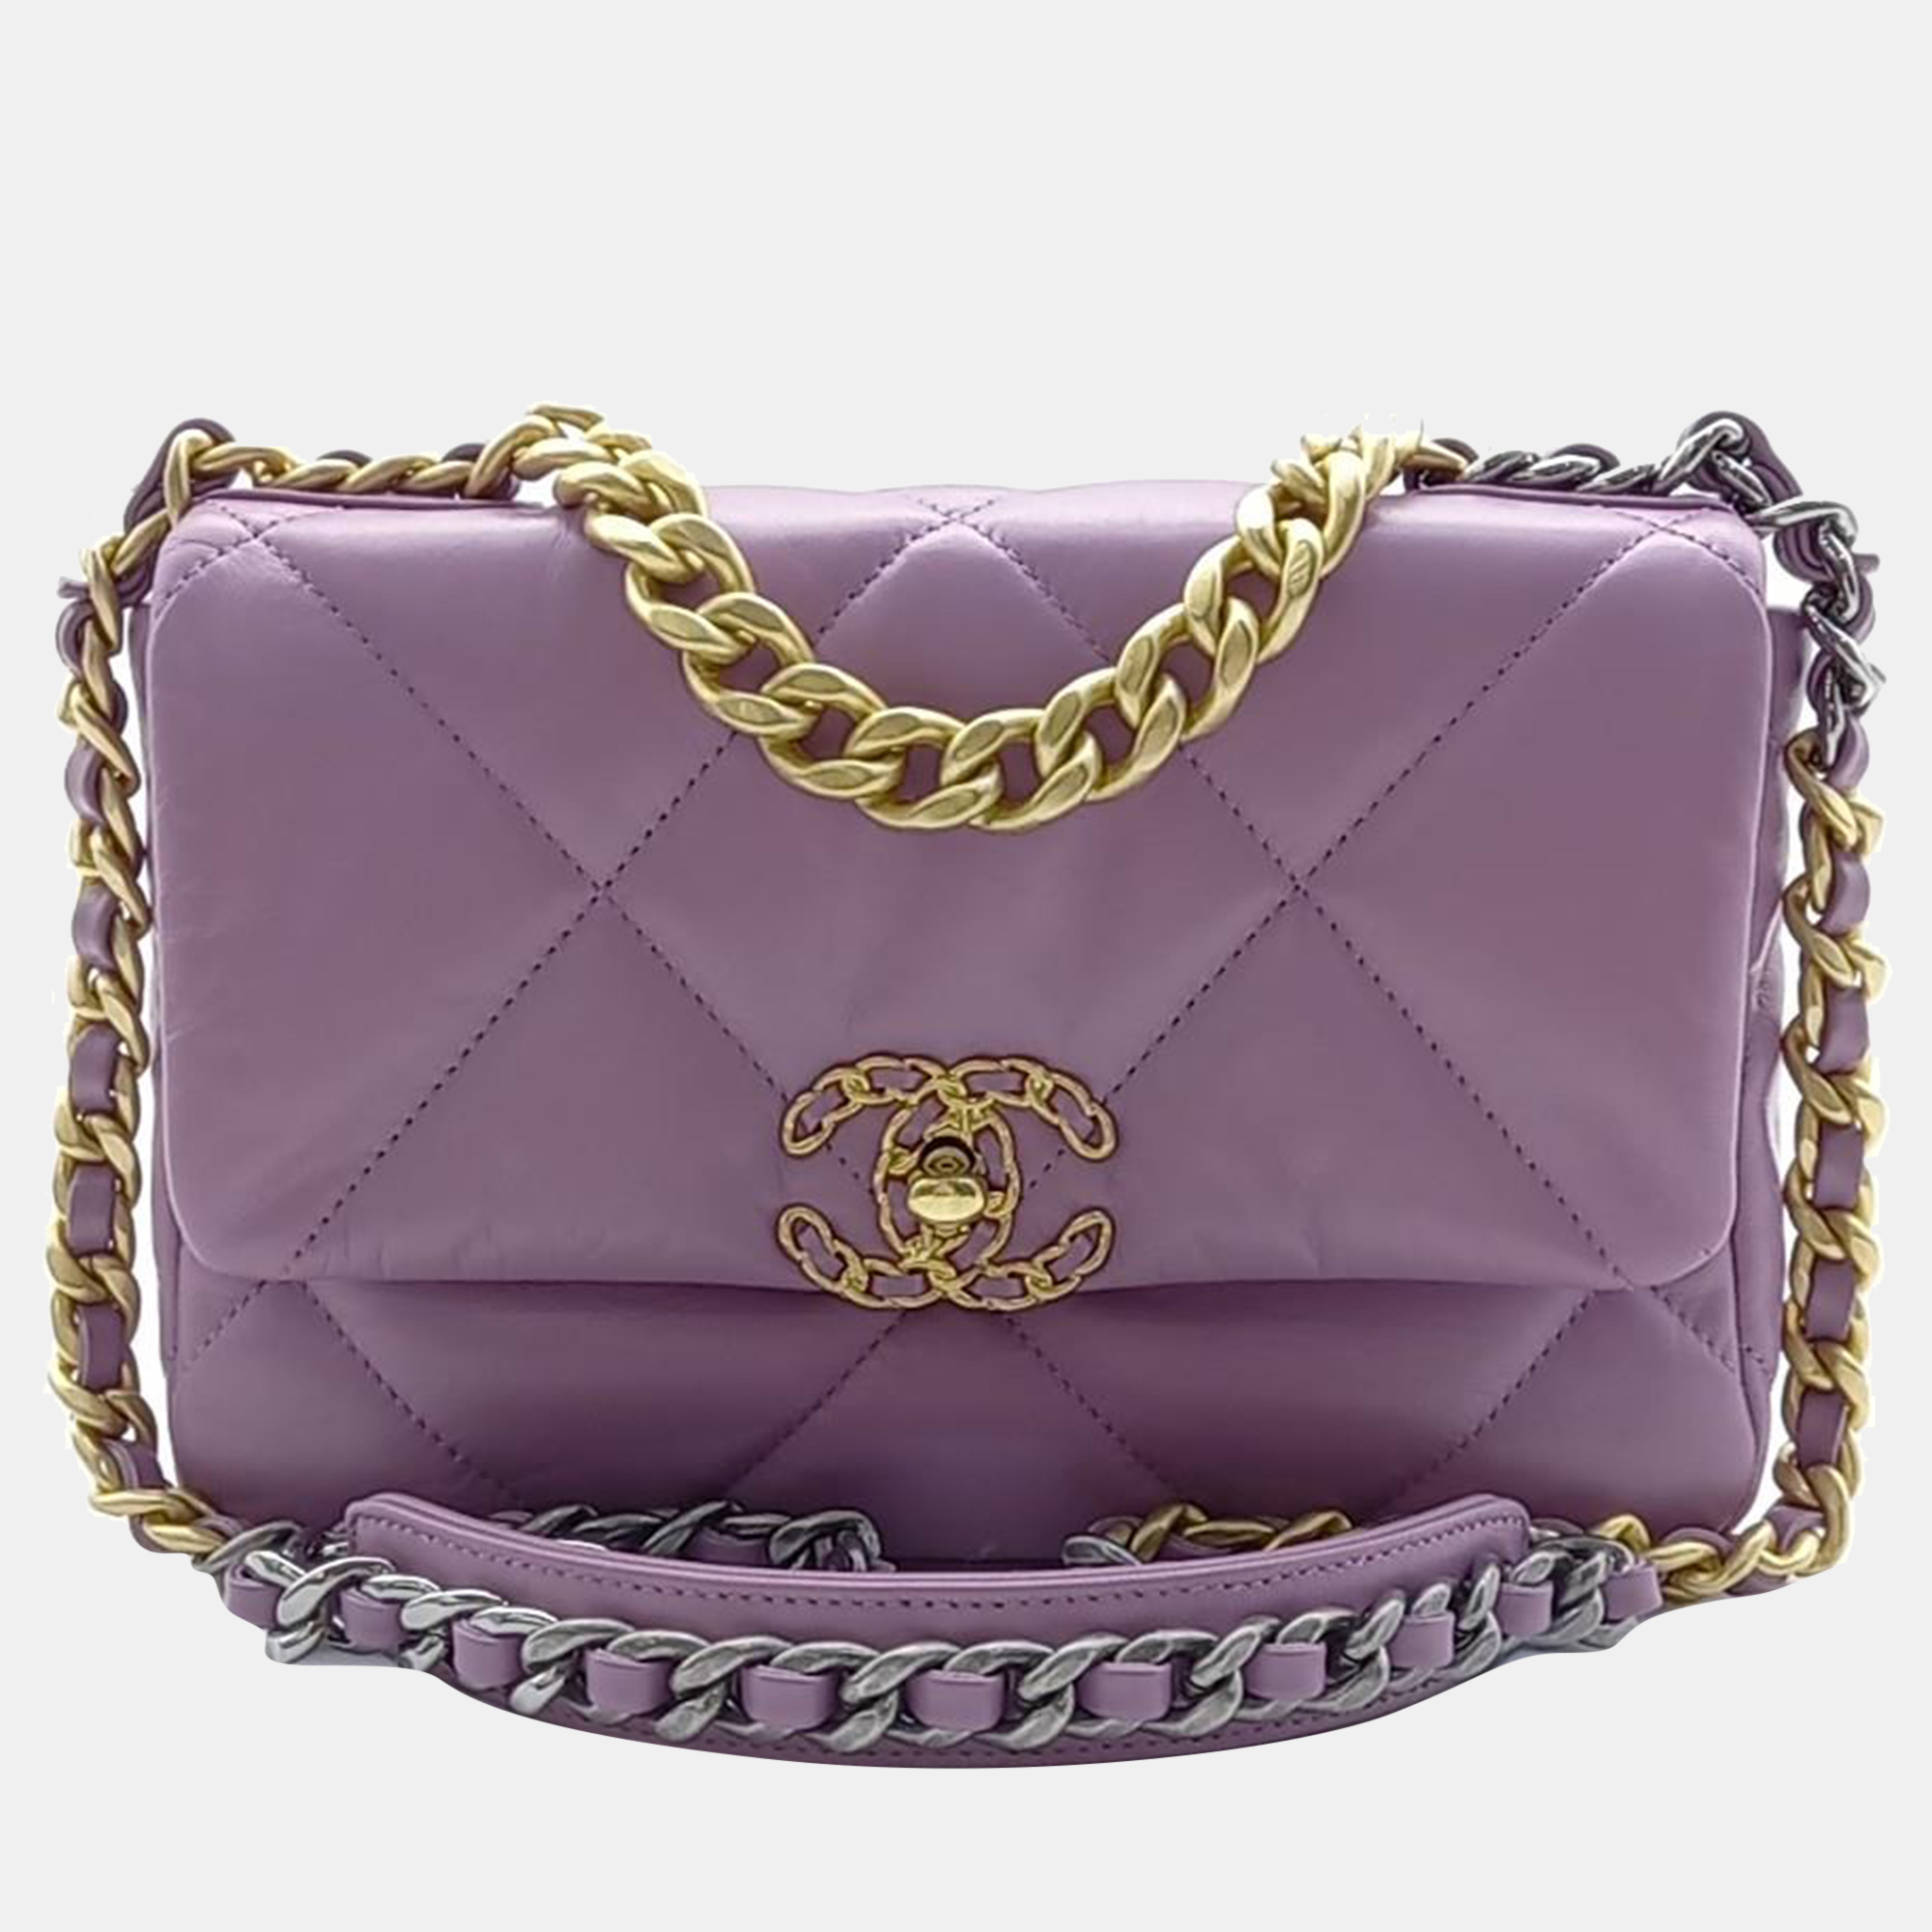 Carry this lovely Chanel shoulder bag as a stylish accompaniment to your ensemble. Made from high quality materials it has a luxe look and durable quality.